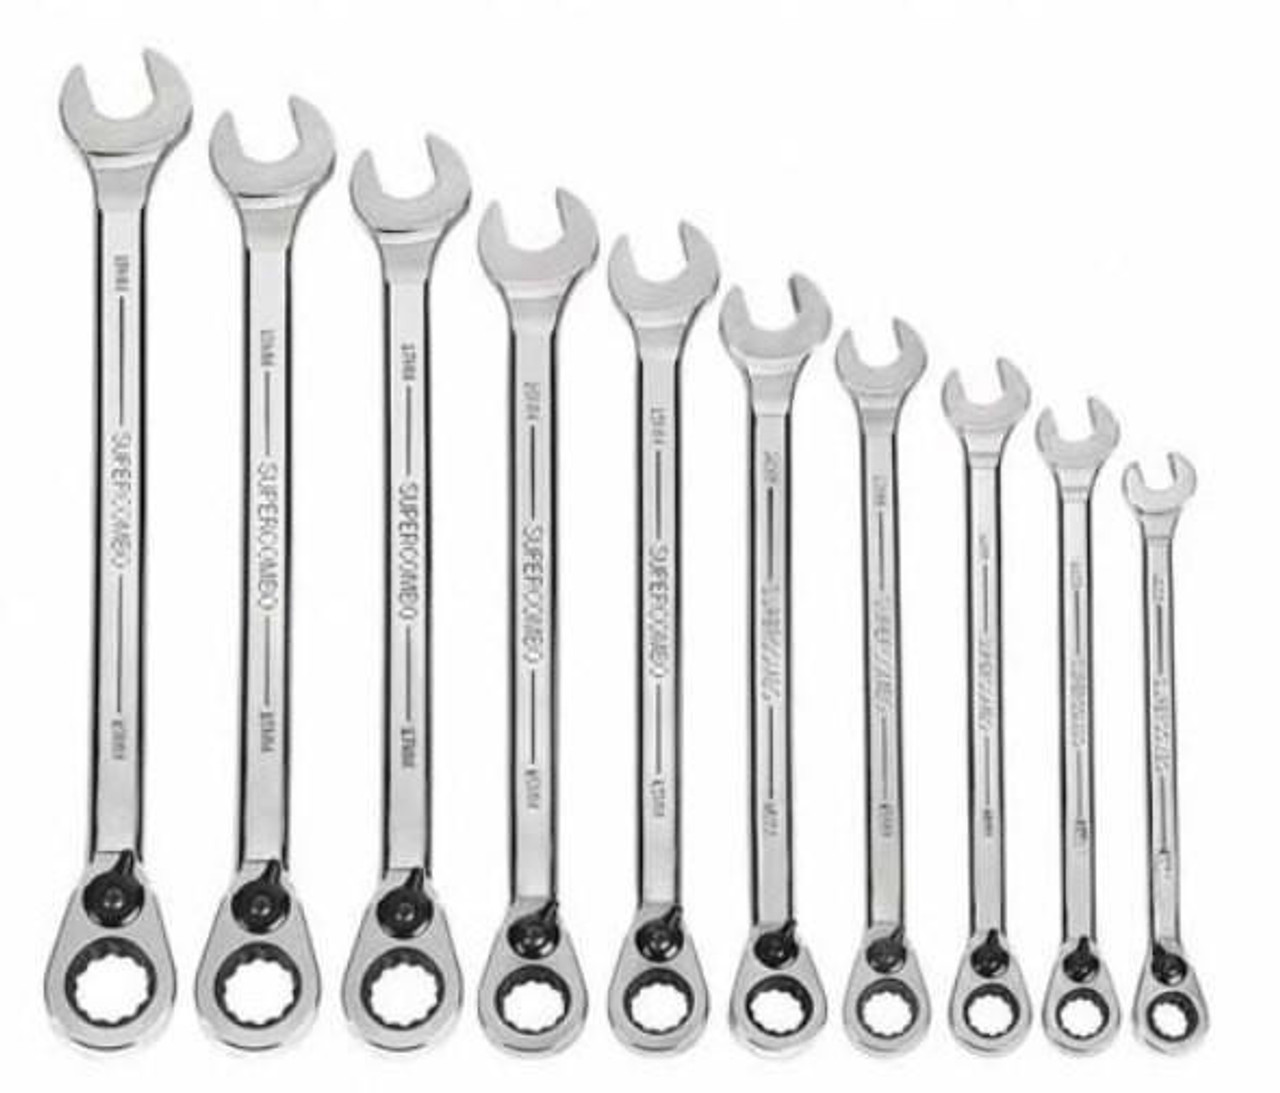 10 - 19mm Williams Reversible Combination Ratcheting Wrench Set 10